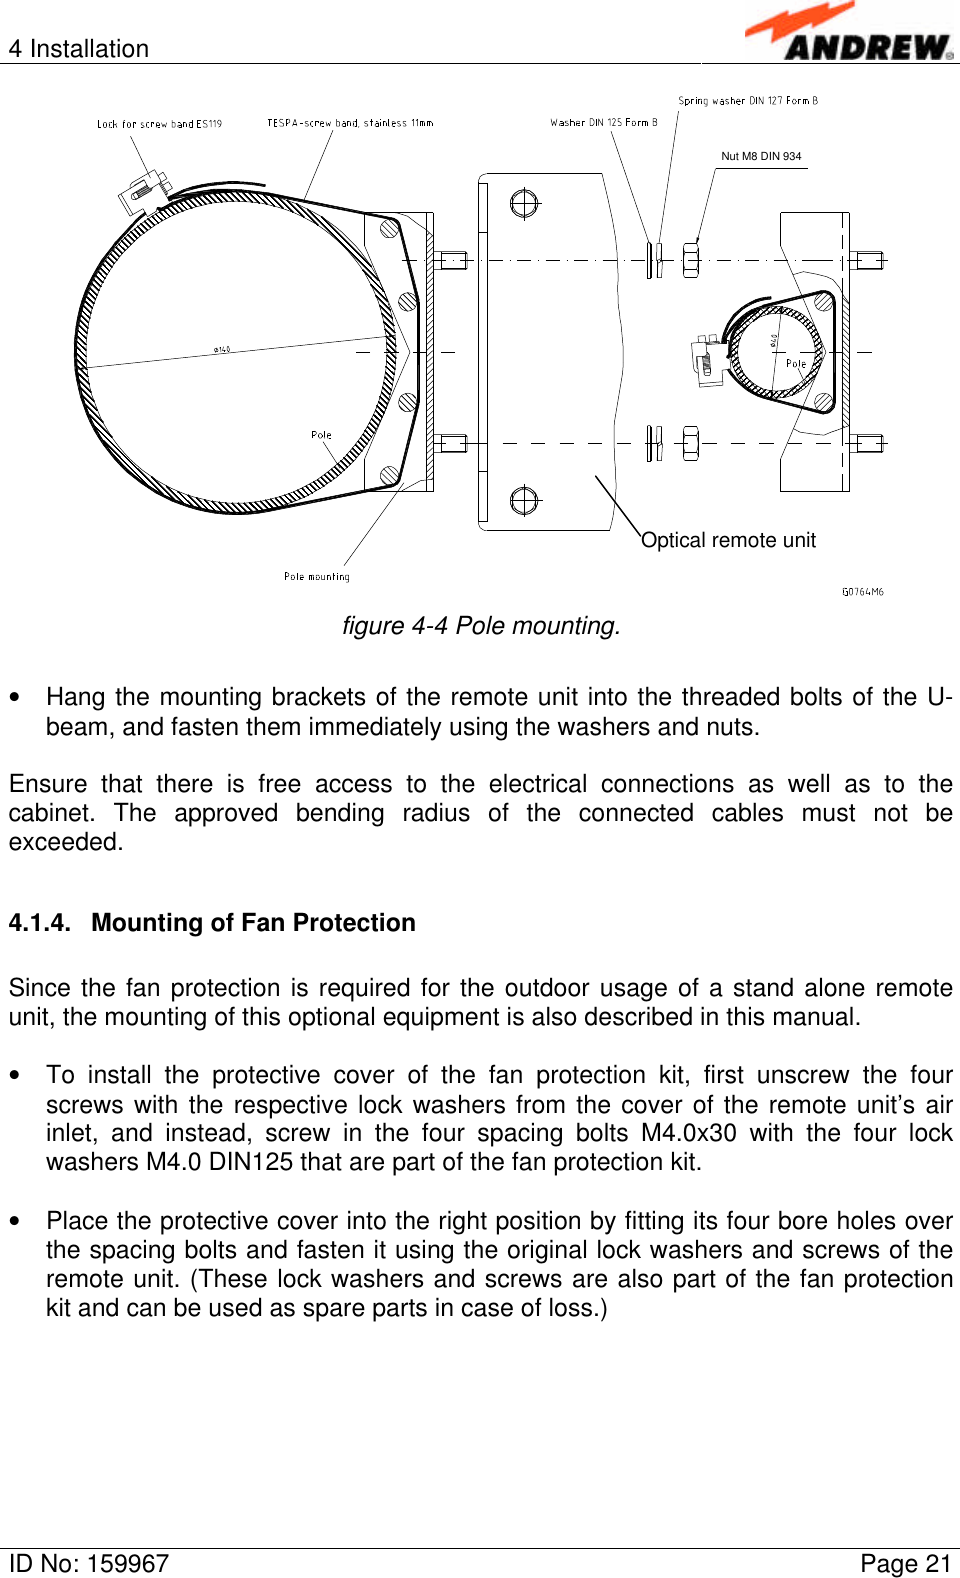 4 InstallationID No: 159967 Page 21Nut M8 DIN 934figure 4-4 Pole mounting.• Hang the mounting brackets of the remote unit into the threaded bolts of the U-beam, and fasten them immediately using the washers and nuts.Ensure that there is free access to the electrical connections as well as to thecabinet. The approved bending radius of the connected cables must not beexceeded.4.1.4. Mounting of Fan ProtectionSince the fan protection is required for the outdoor usage of a stand alone remoteunit, the mounting of this optional equipment is also described in this manual.• To install the protective cover of the fan protection kit, first unscrew the fourscrews with the respective lock washers from the cover of the remote unit’s airinlet, and instead, screw in the four spacing bolts M4.0x30 with the four lockwashers M4.0 DIN125 that are part of the fan protection kit.• Place the protective cover into the right position by fitting its four bore holes overthe spacing bolts and fasten it using the original lock washers and screws of theremote unit. (These lock washers and screws are also part of the fan protectionkit and can be used as spare parts in case of loss.)Optical remote unit